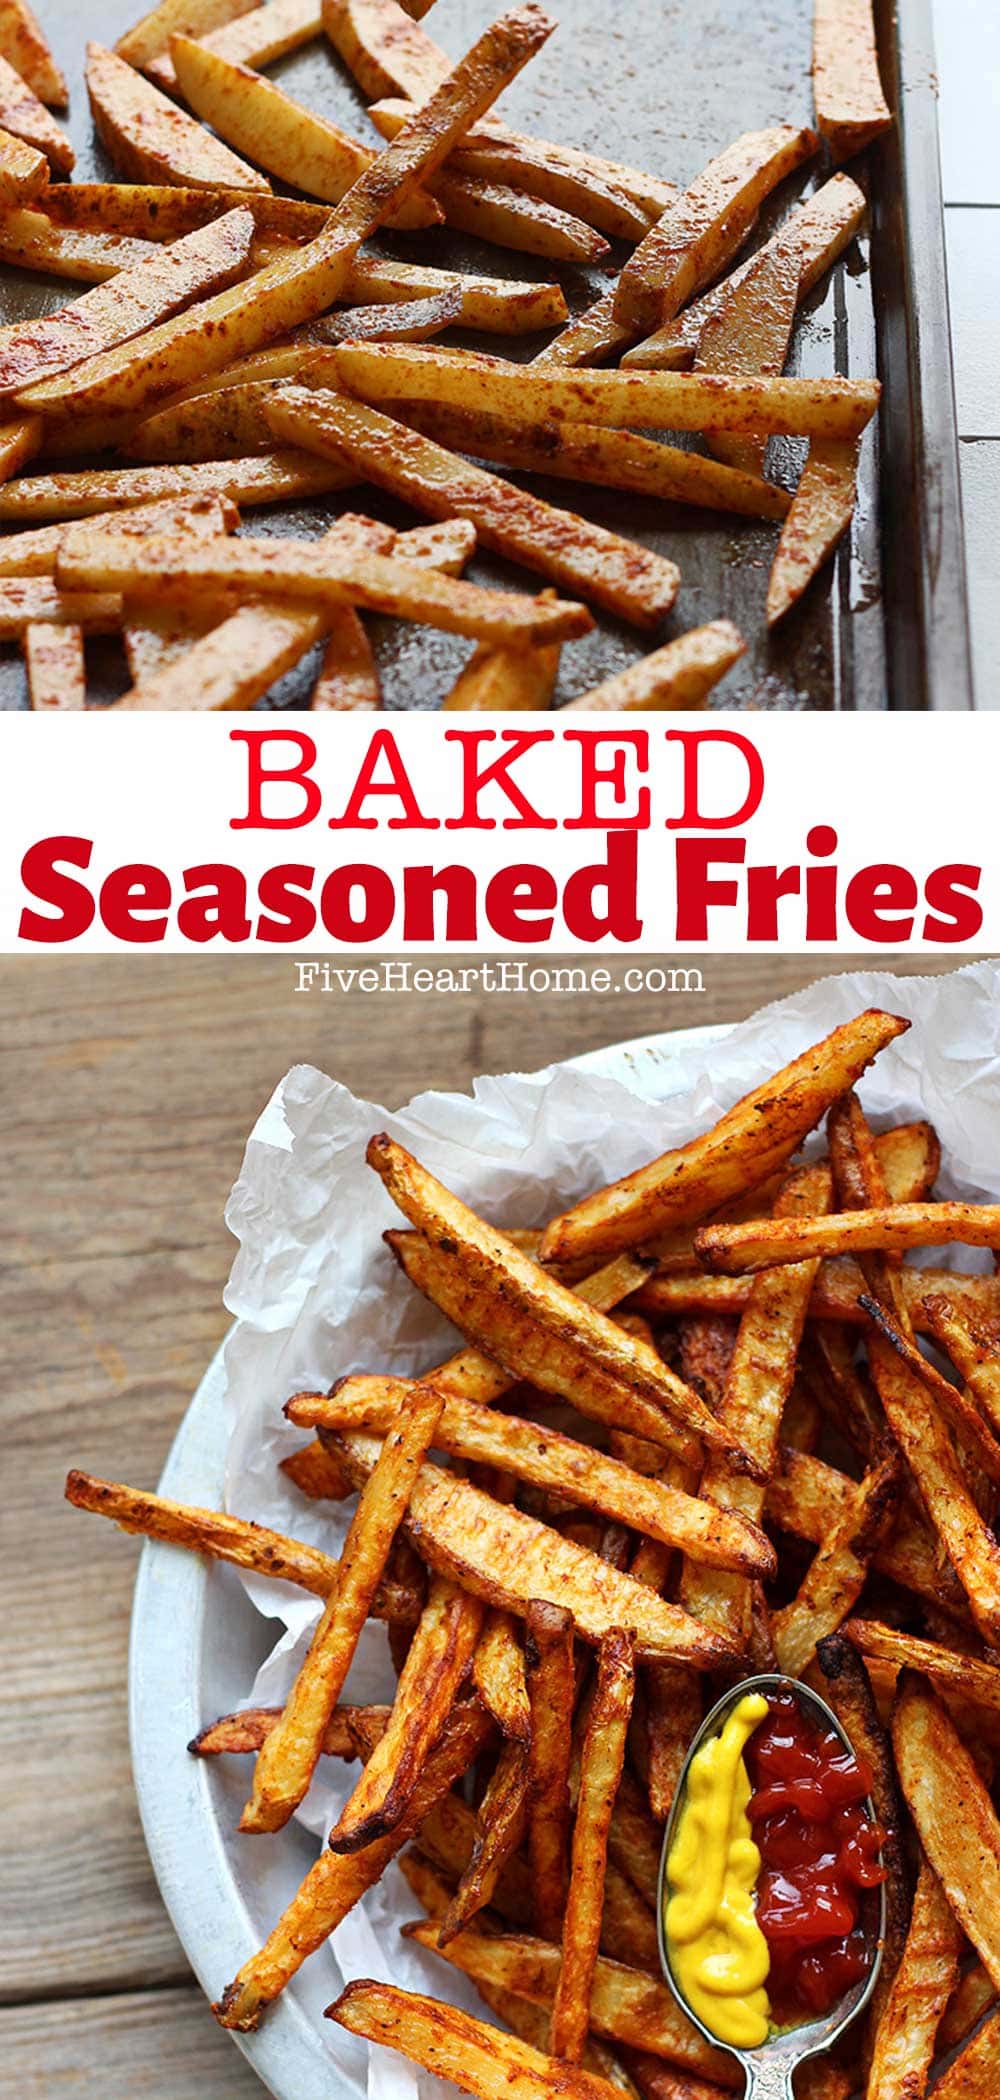 Seasoned Fries are coated with a delicious, spicy seasoning mix and baked --not fried! -- for a crispy, lightened-up, homemade side dish or snack! | FiveHeartHome.com via @fivehearthome